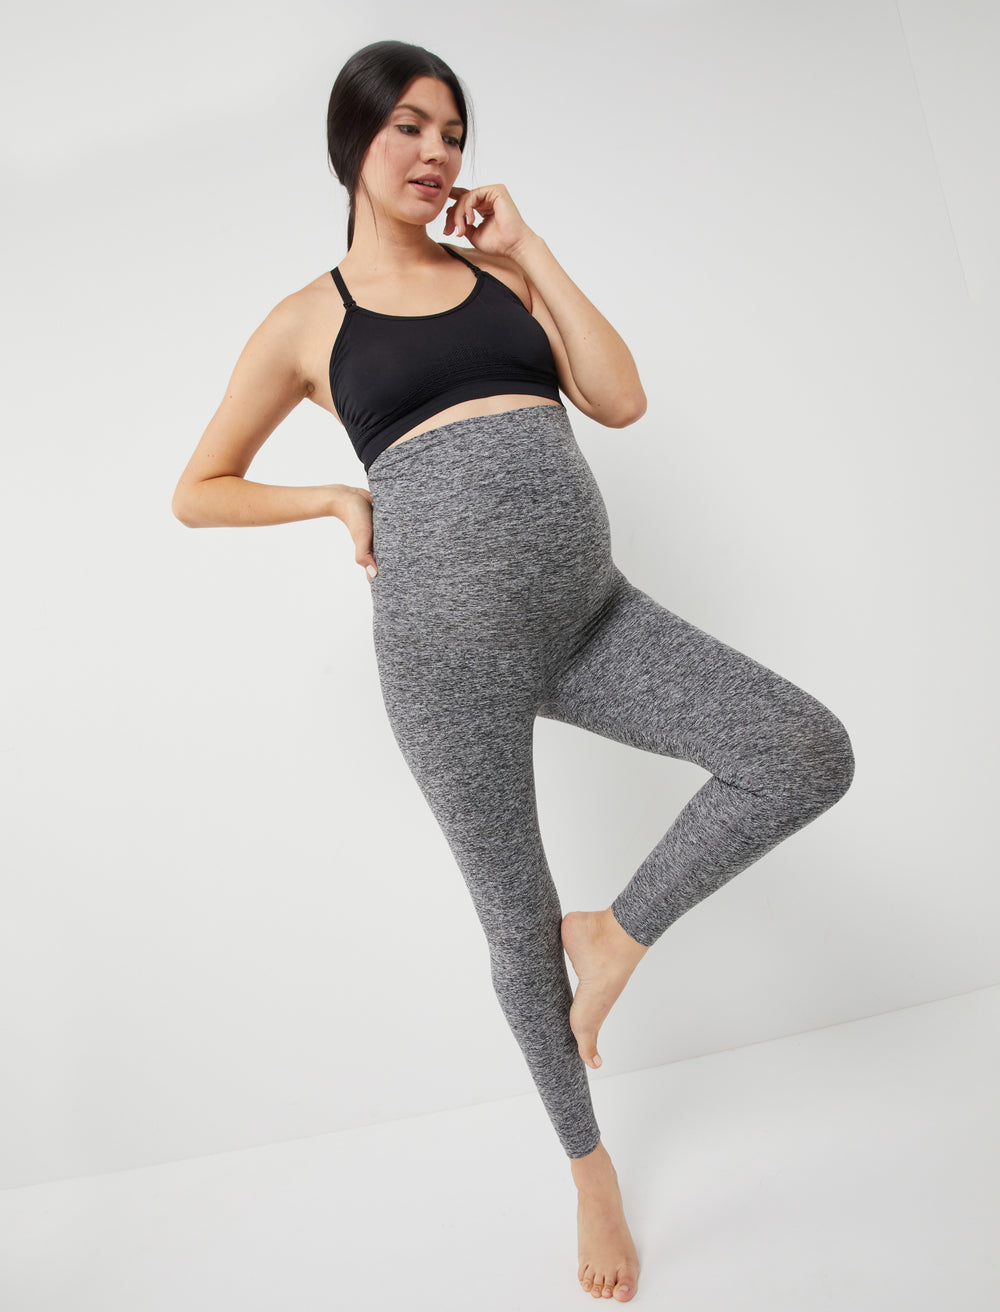 Nike (M) Maternity Collection Review: One Vogue Writer Test Drives